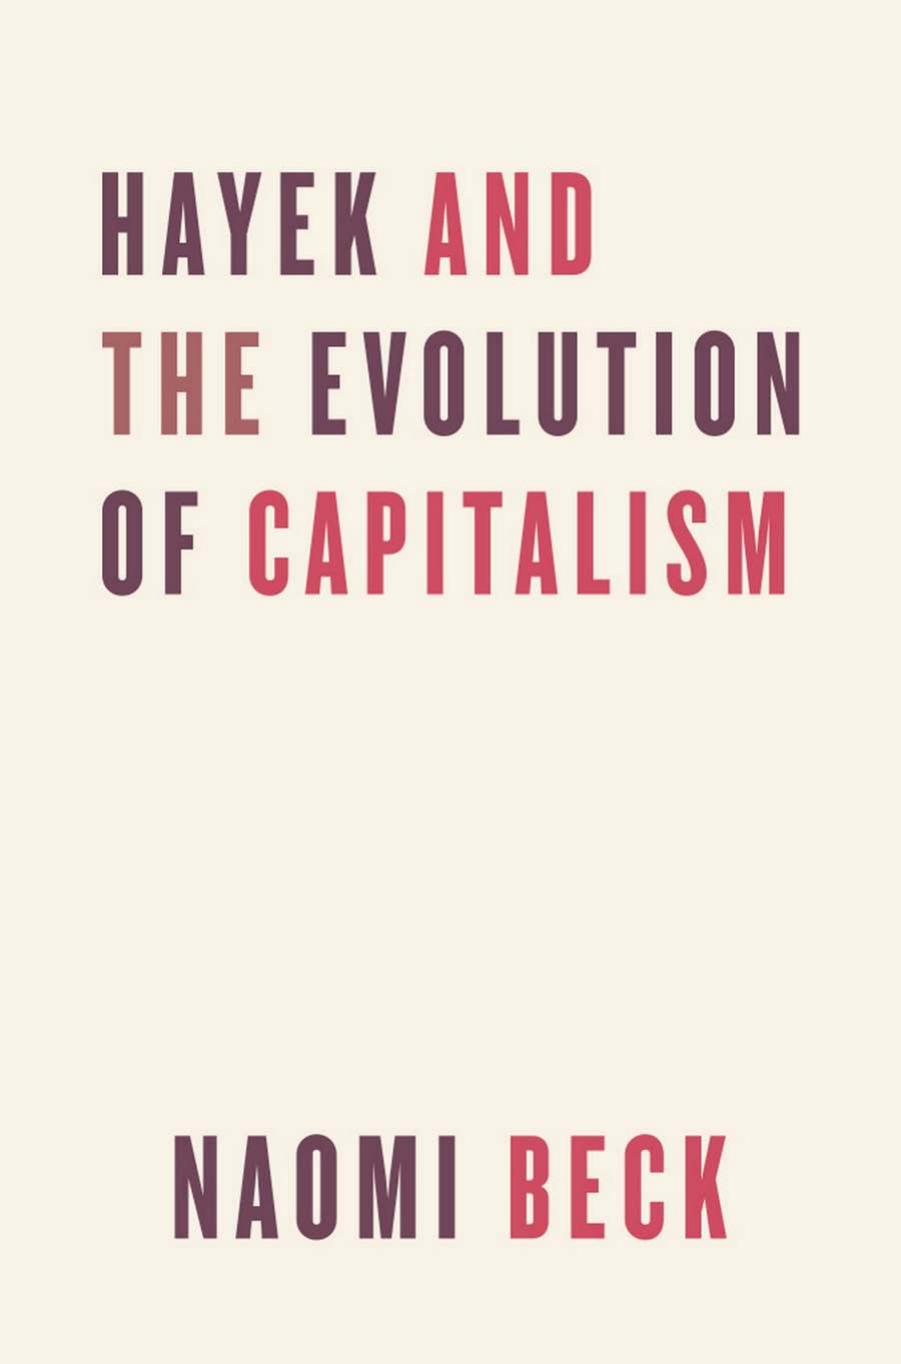 Hayek and the Evolution of Capitalism by Naomi Beck